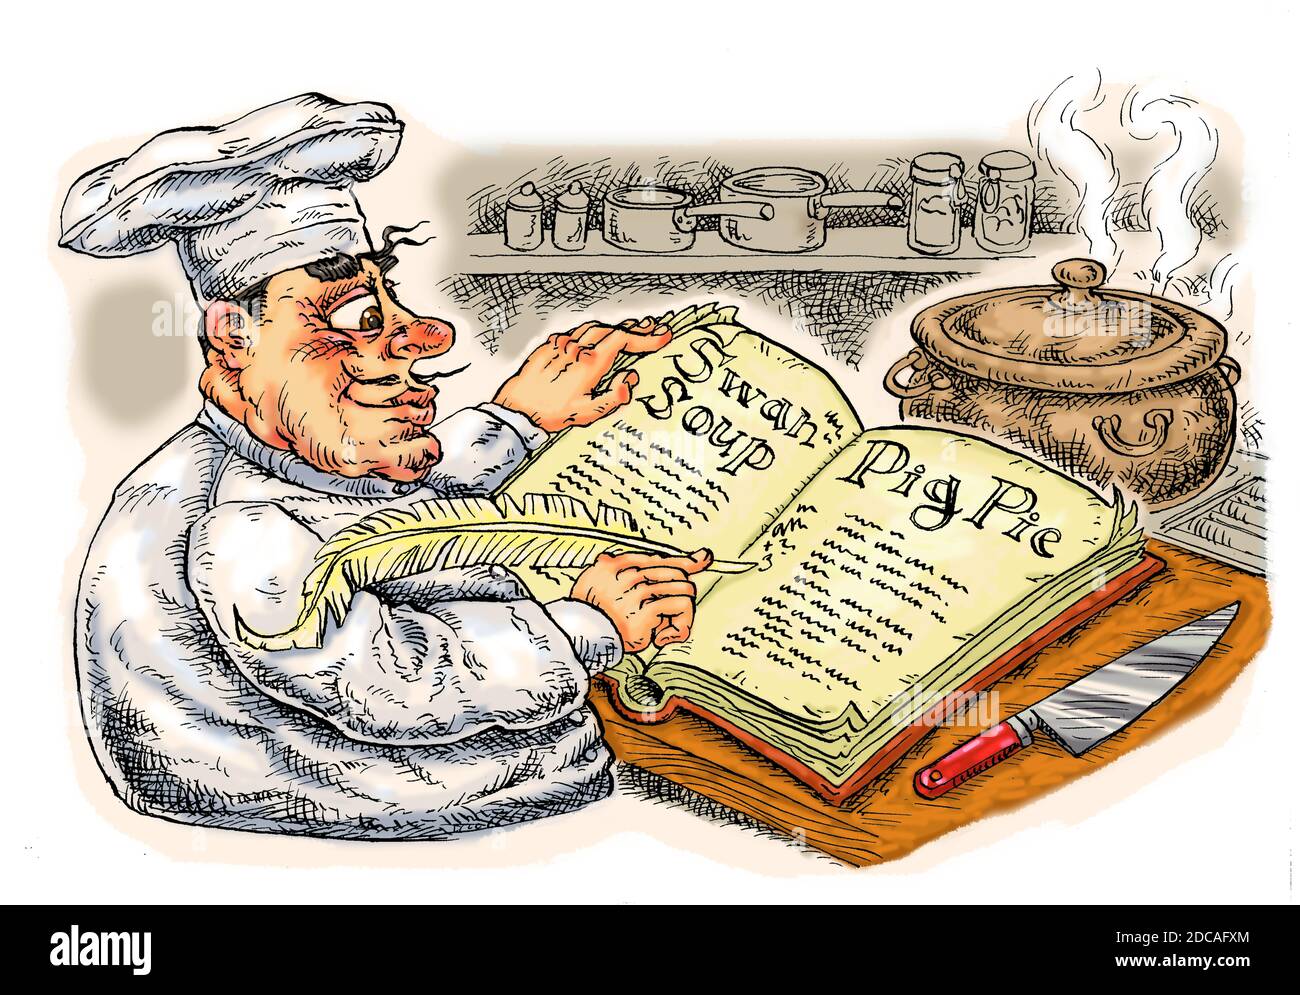 Art work illustration of a chef cook preparing recipes from an historical /traditional recipe book Christmas festive holiday season entertaining food. Stock Photo